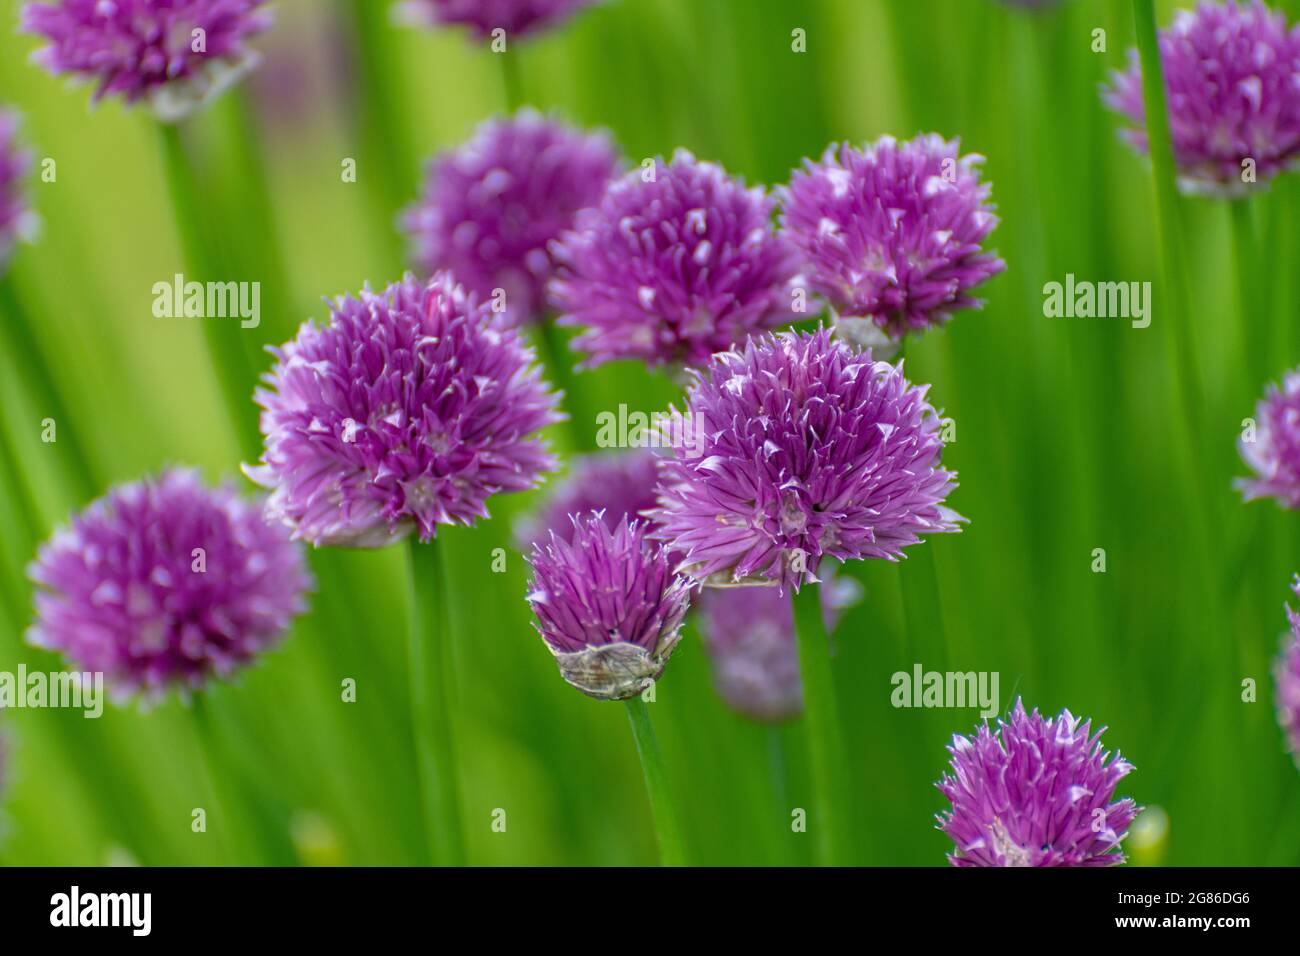 purple flower heads of a chive plant Stock Photo